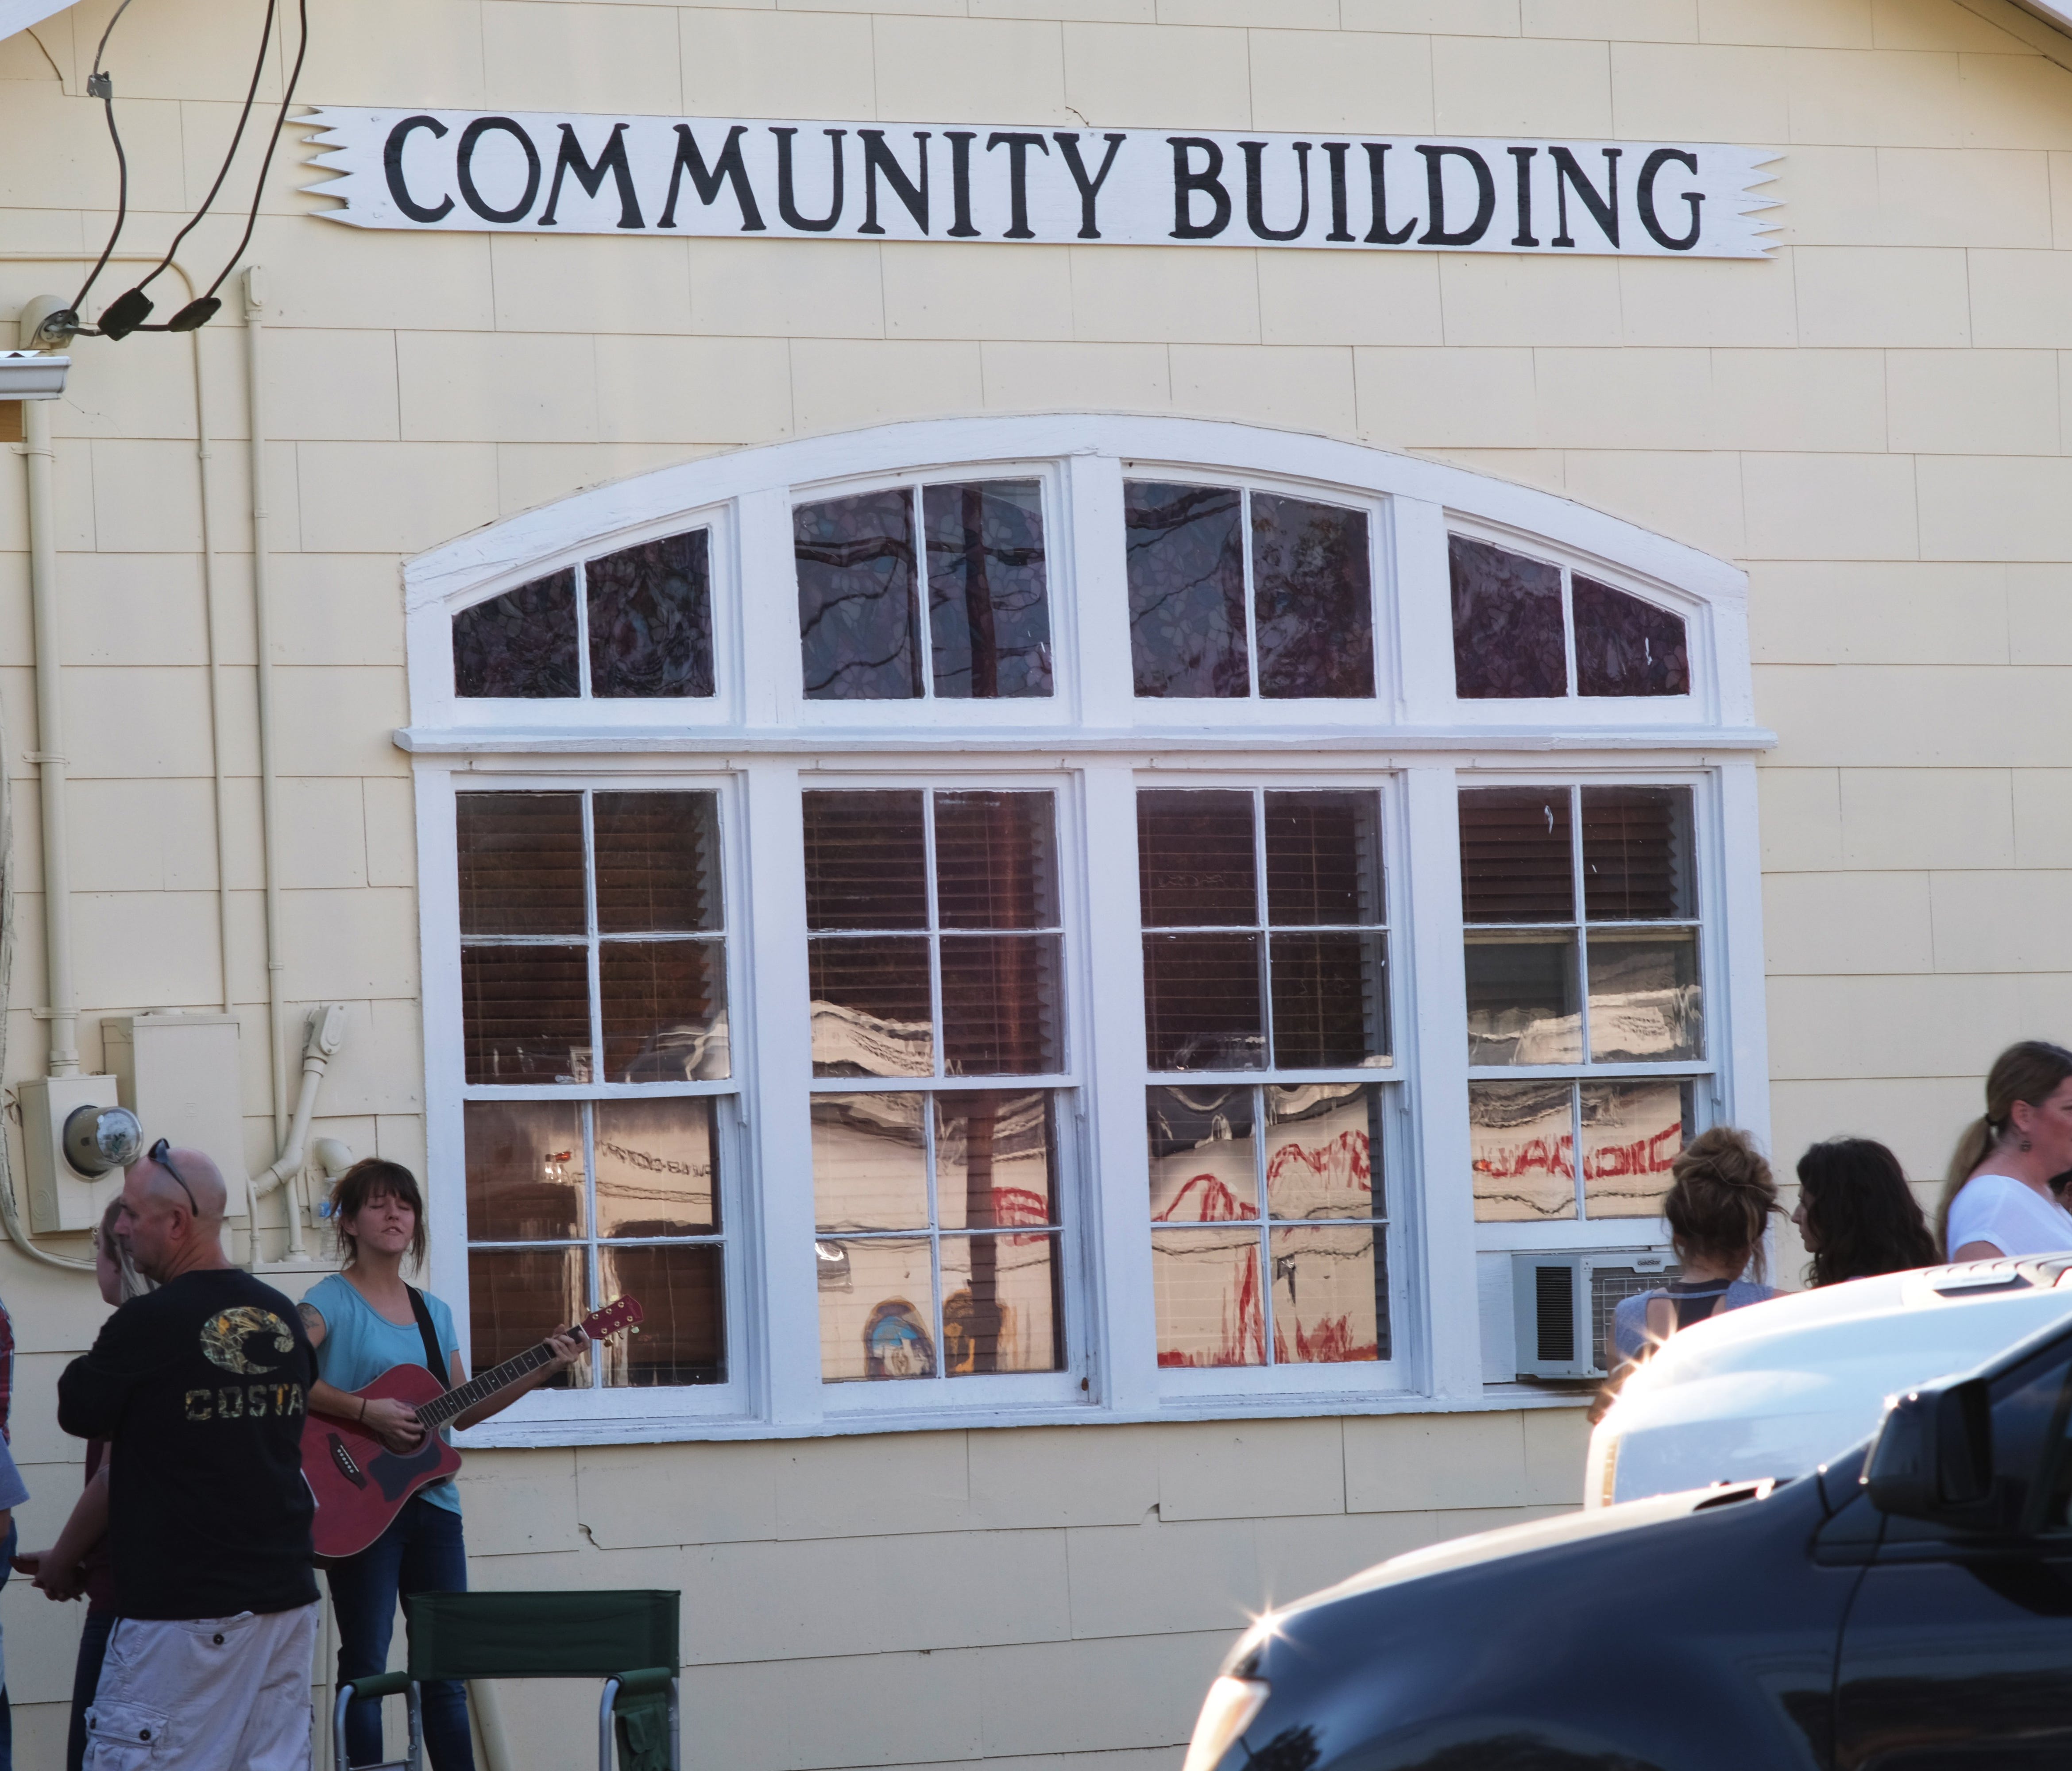 People gather outside the Sutherland Springs Community Building near the scene of a mass shooting at the First Baptist Church in Sutherland Springs, Texas, on Nov. 5, 2017.